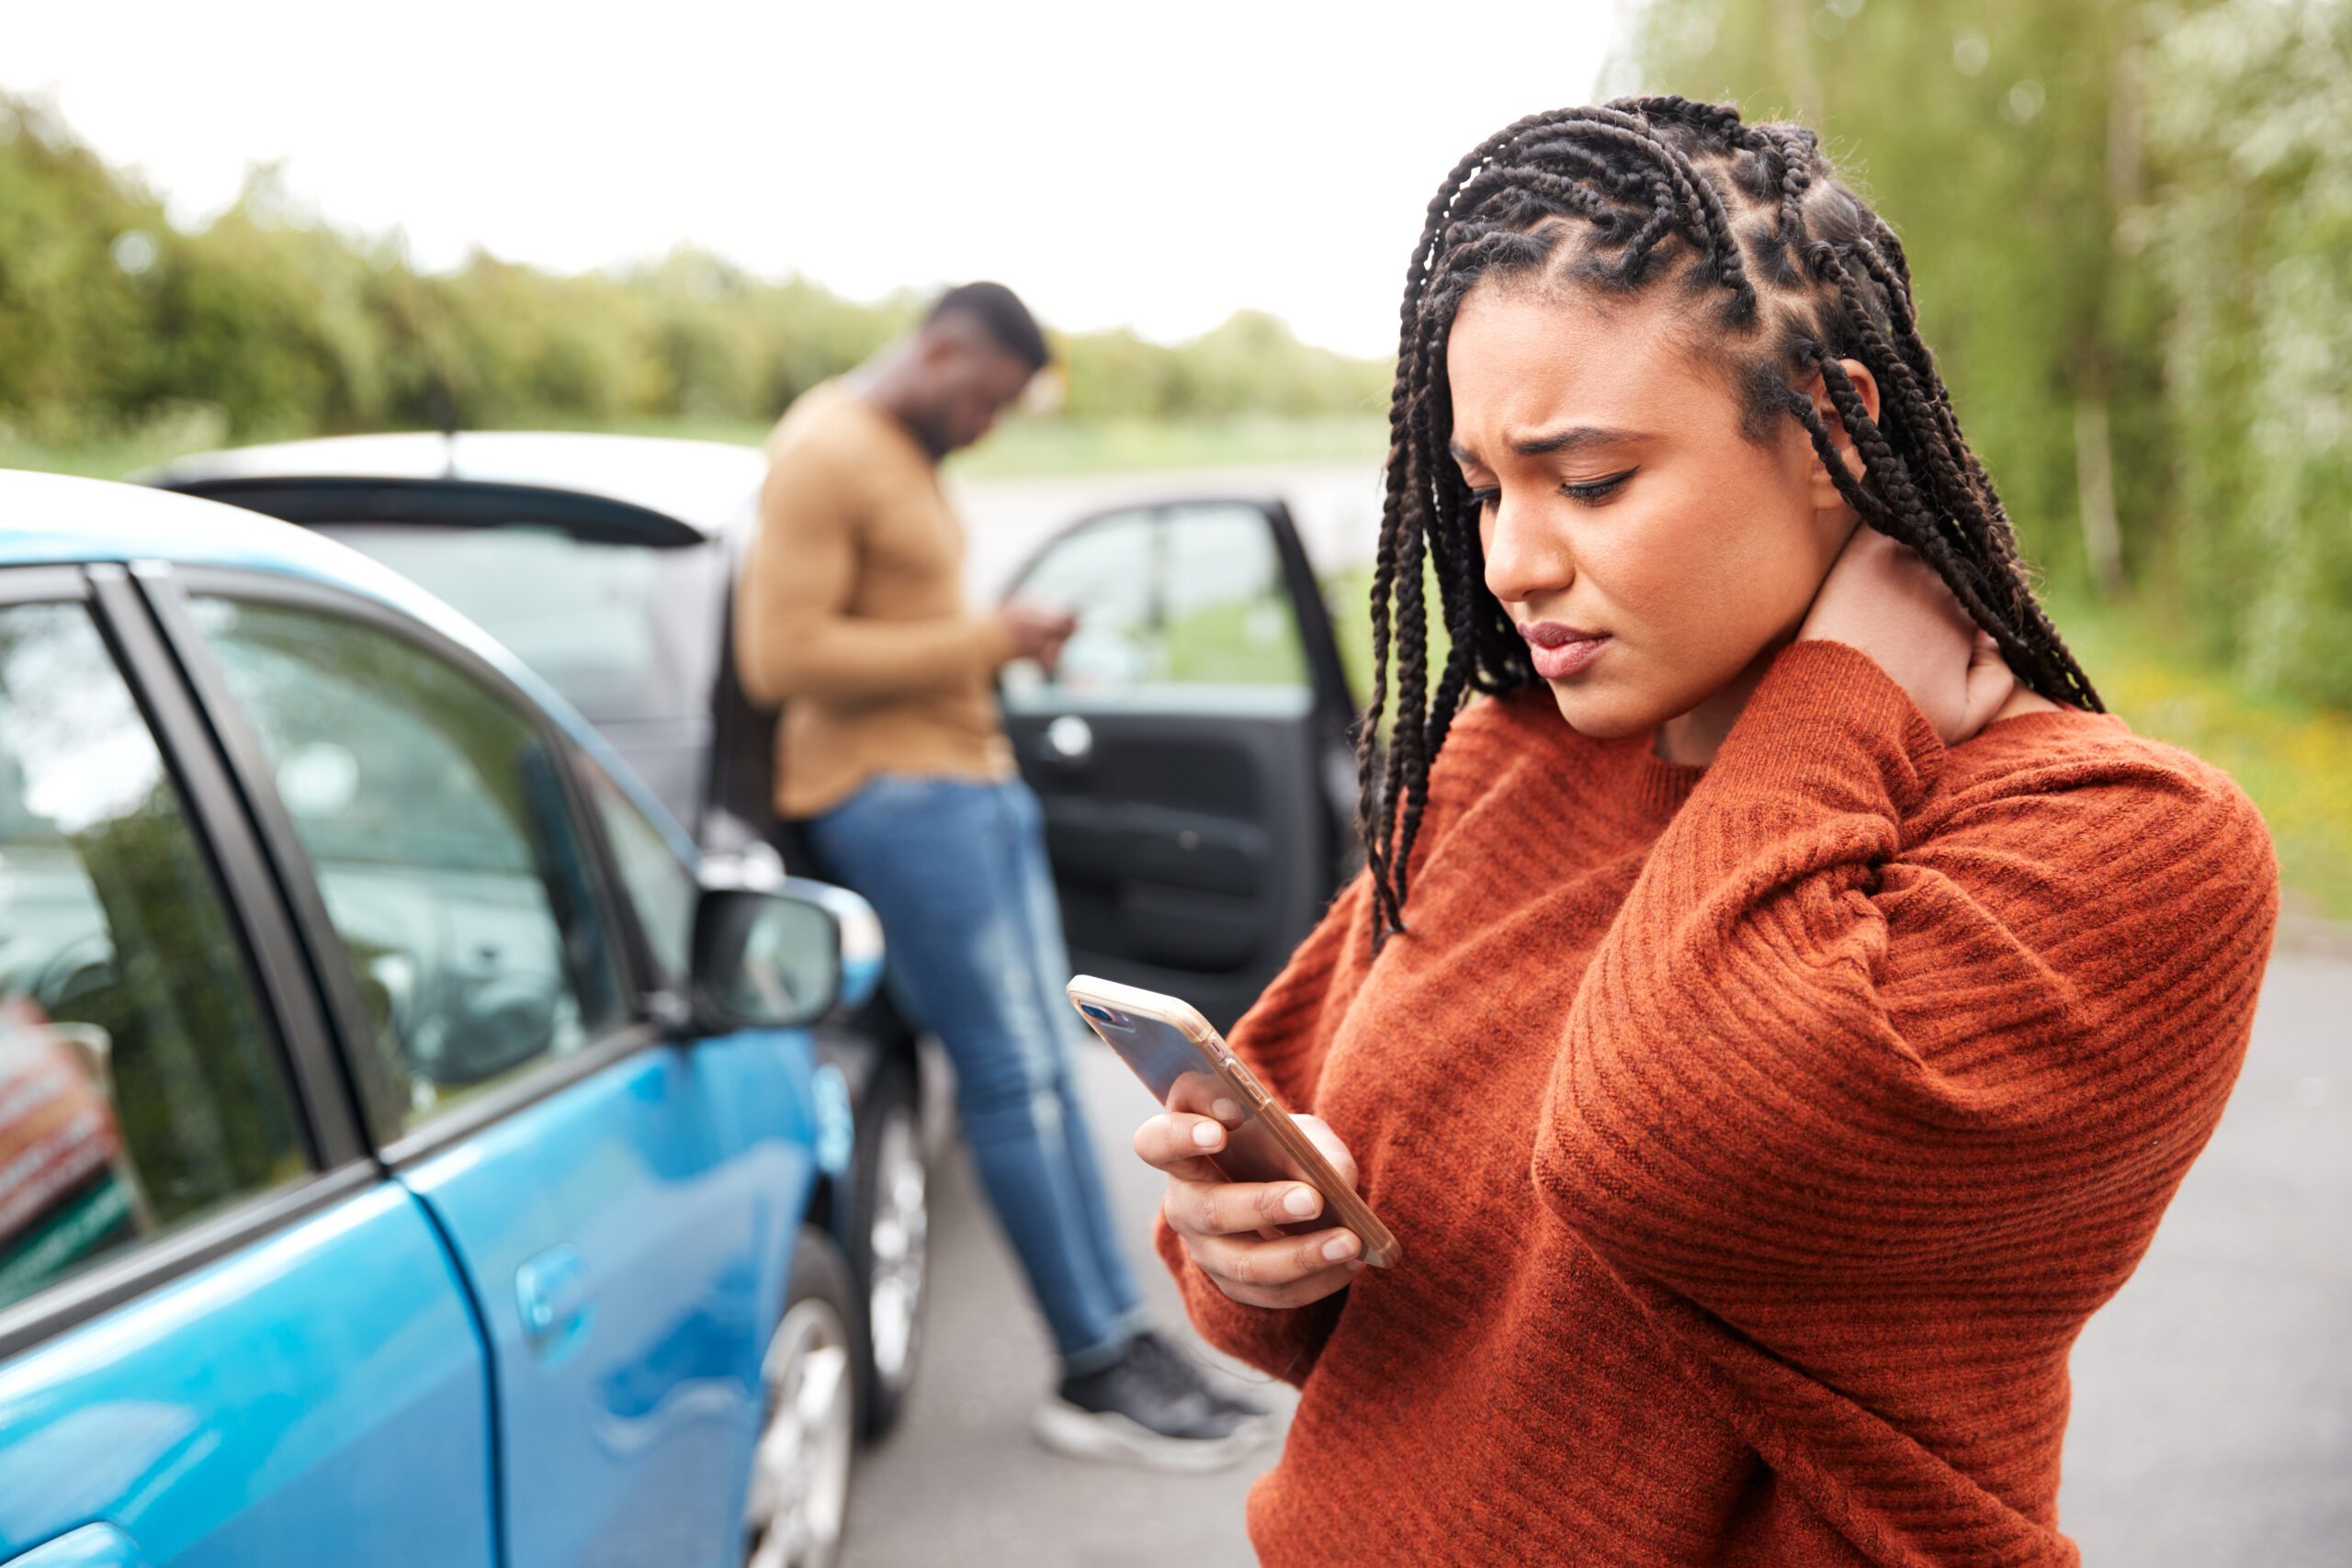 Two people, a man in the background and a woman with her hand on the back of her neck in the foreground, are standing in front of a car accident, looking at their phone screens.